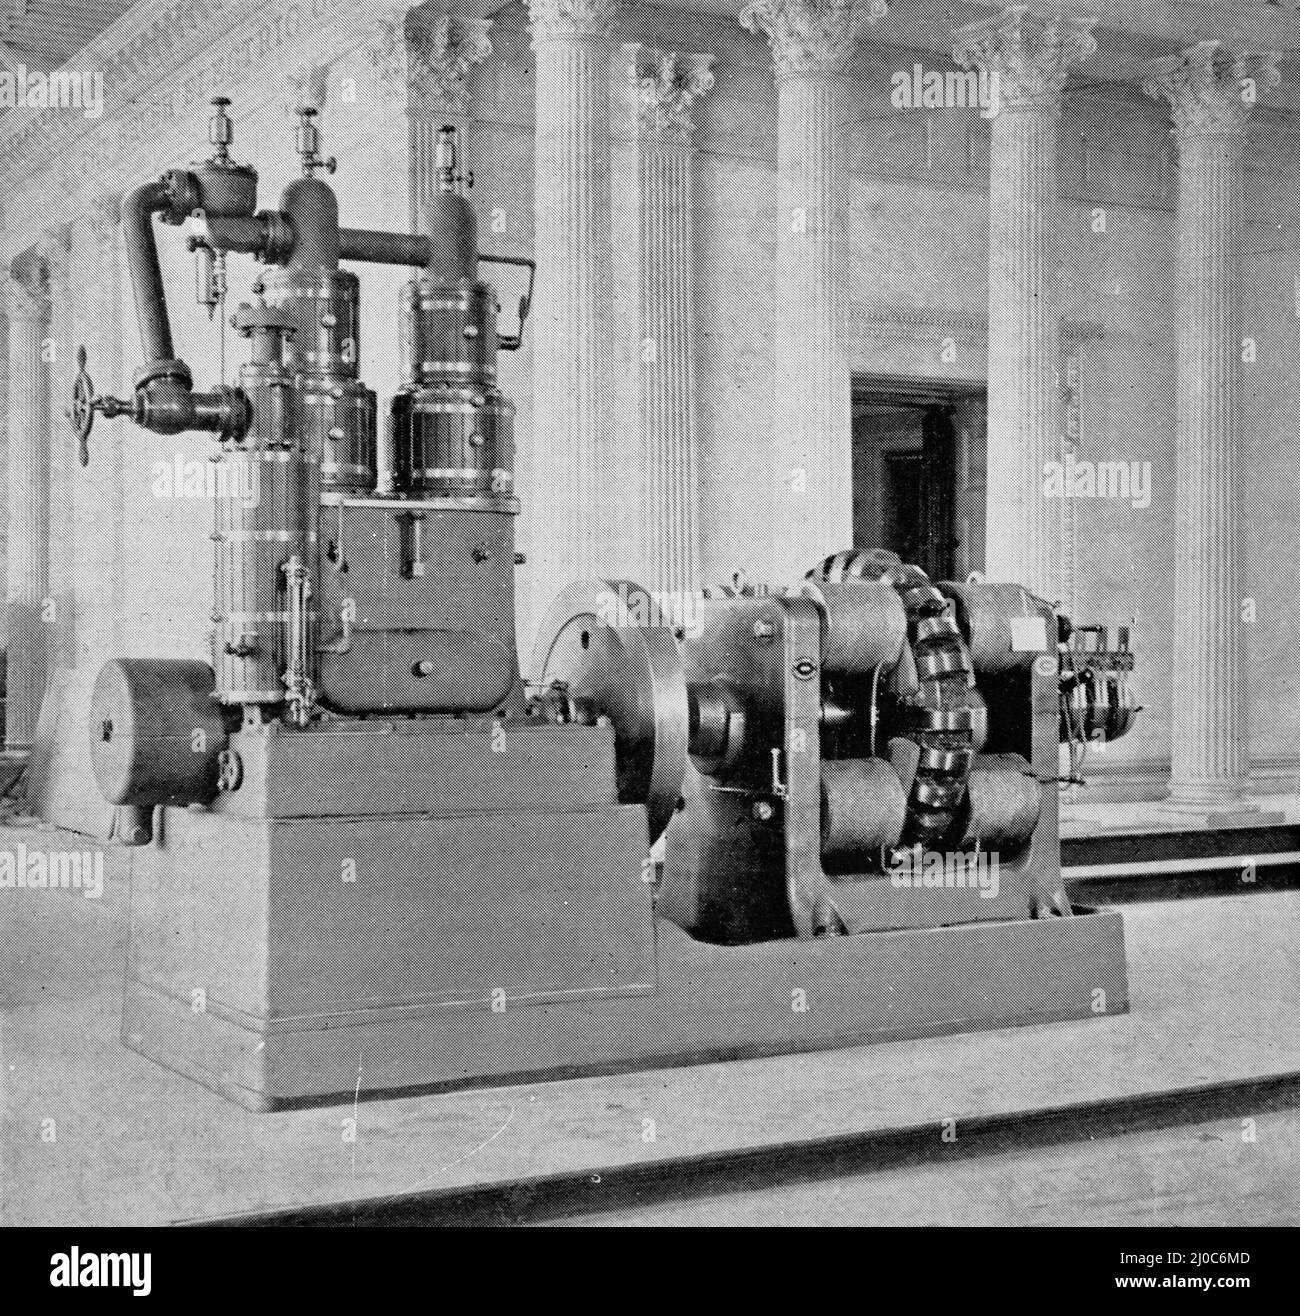 The Willans Engine at the Chicago Fair, 1893. Black and white photograph. Stock Photo